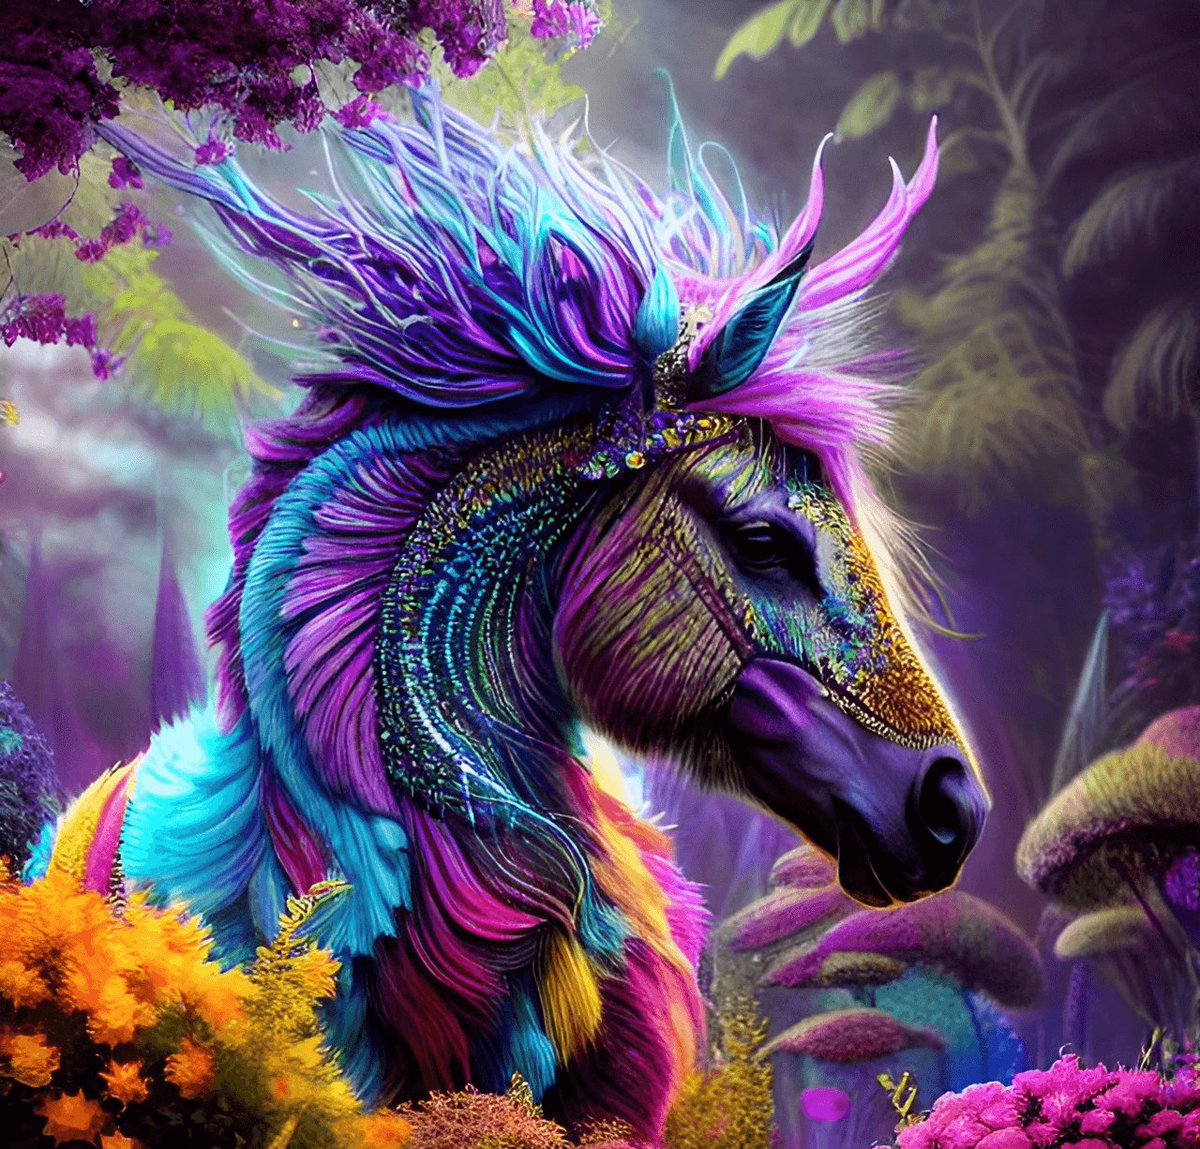 🐴Dream and Enjoy #31 🌈Brand-new @opensea 💜Immerse yourself into a fantastic world and enjoy the unbelievable far away from reality 💙Bargain price 0.001 $ETH Polygon 🔽Link in comments #NFTs #Openseanfts #PolygonNFTs